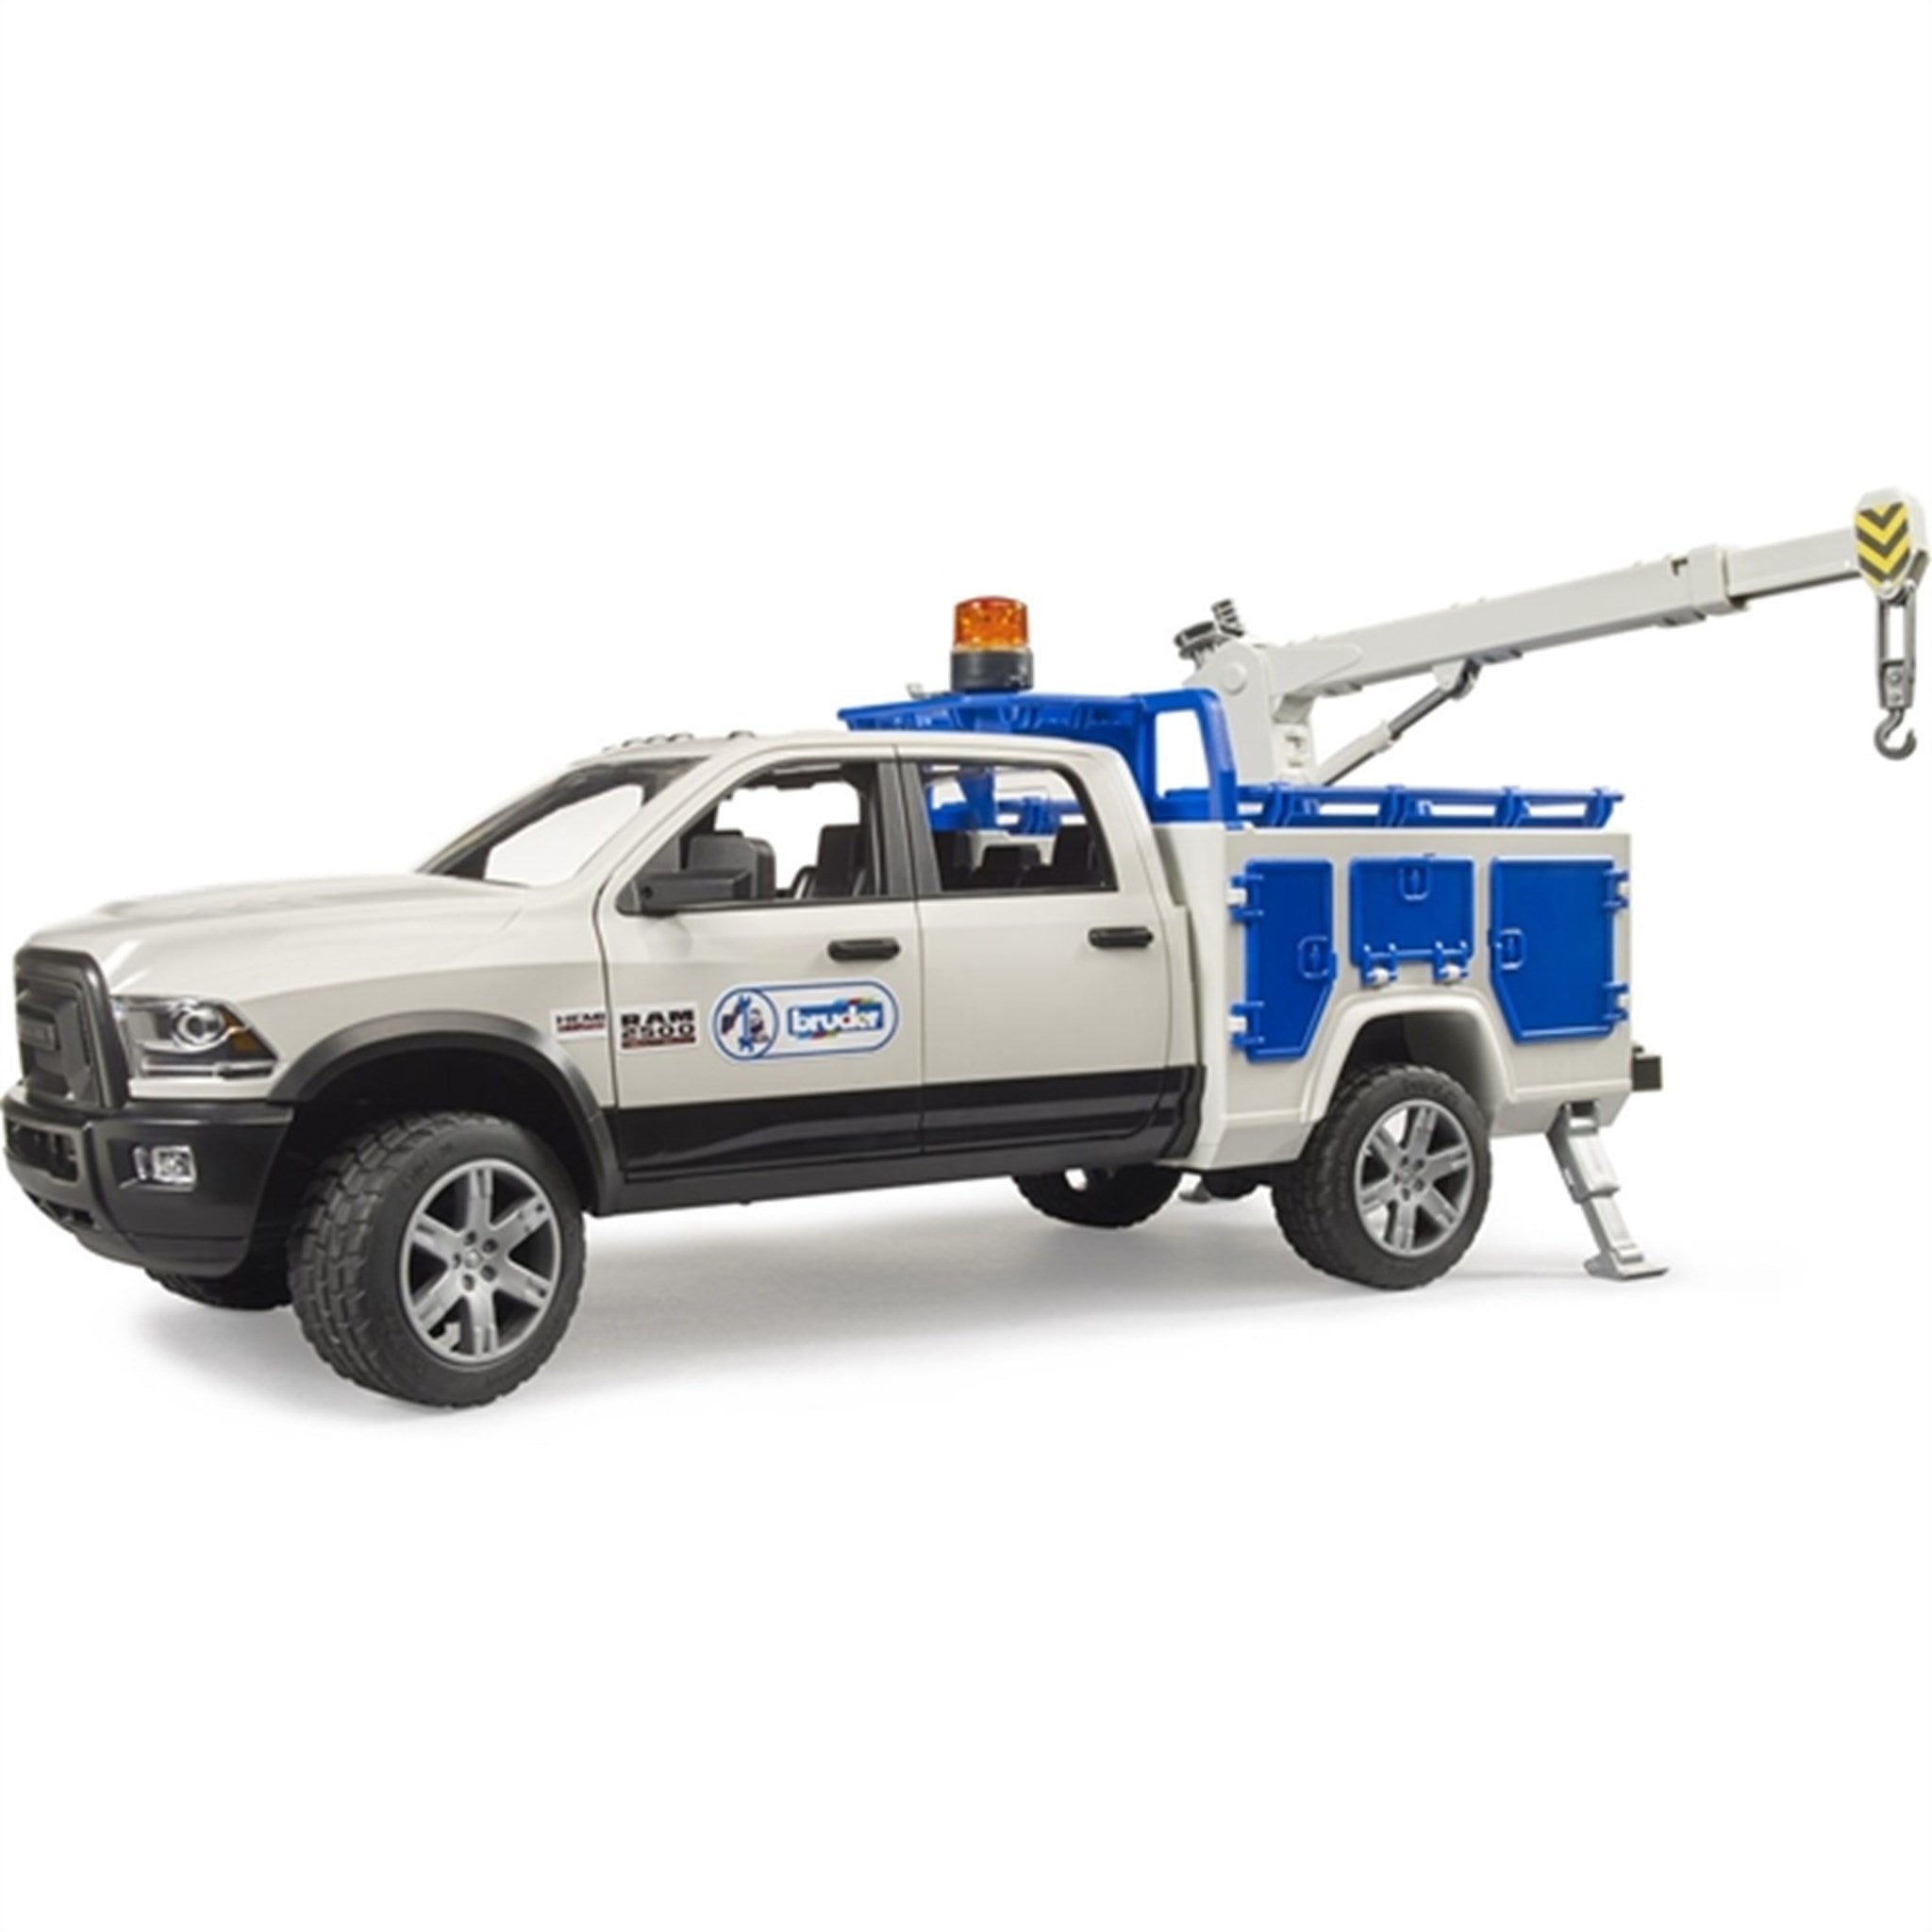 Bruder RAM 2500 Service Truck with Rotating Beacon Light 4